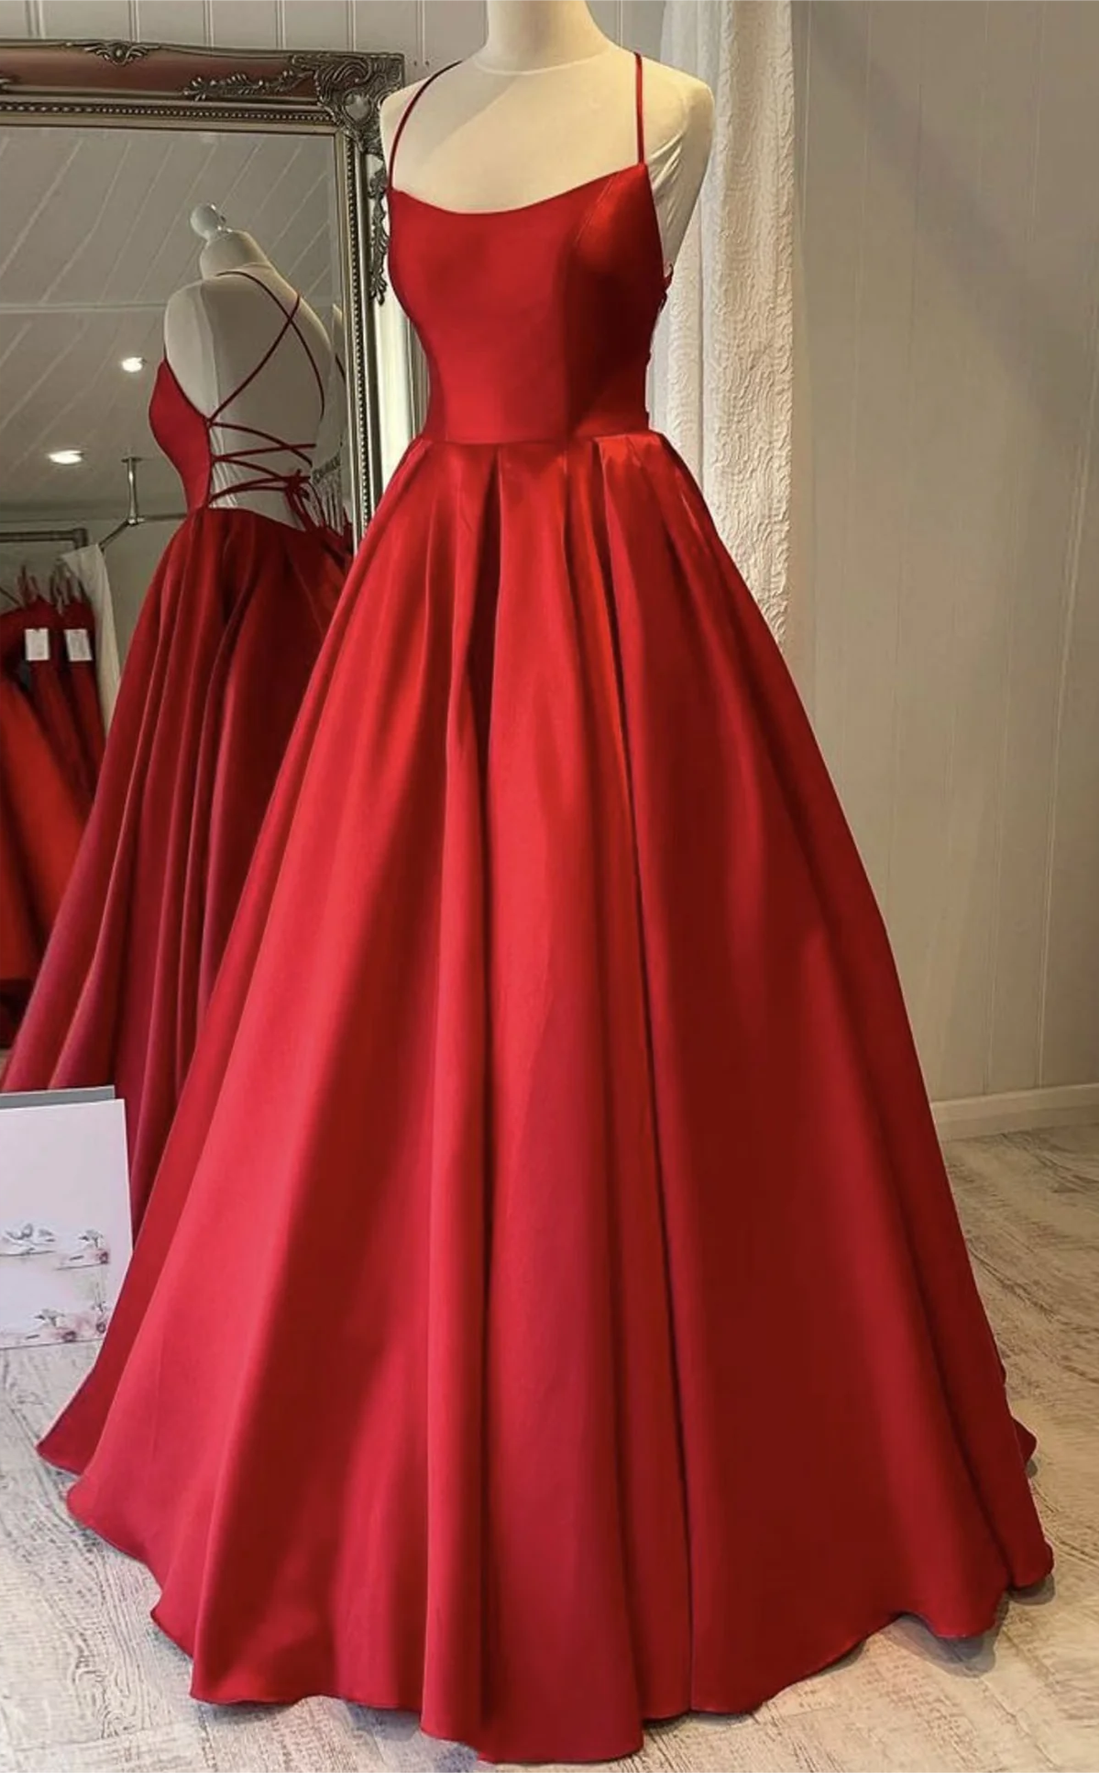 Women A-line Satin Prom Dresses Long Backless Evening Party Gowns Sleeveless Formal Dress Yp090